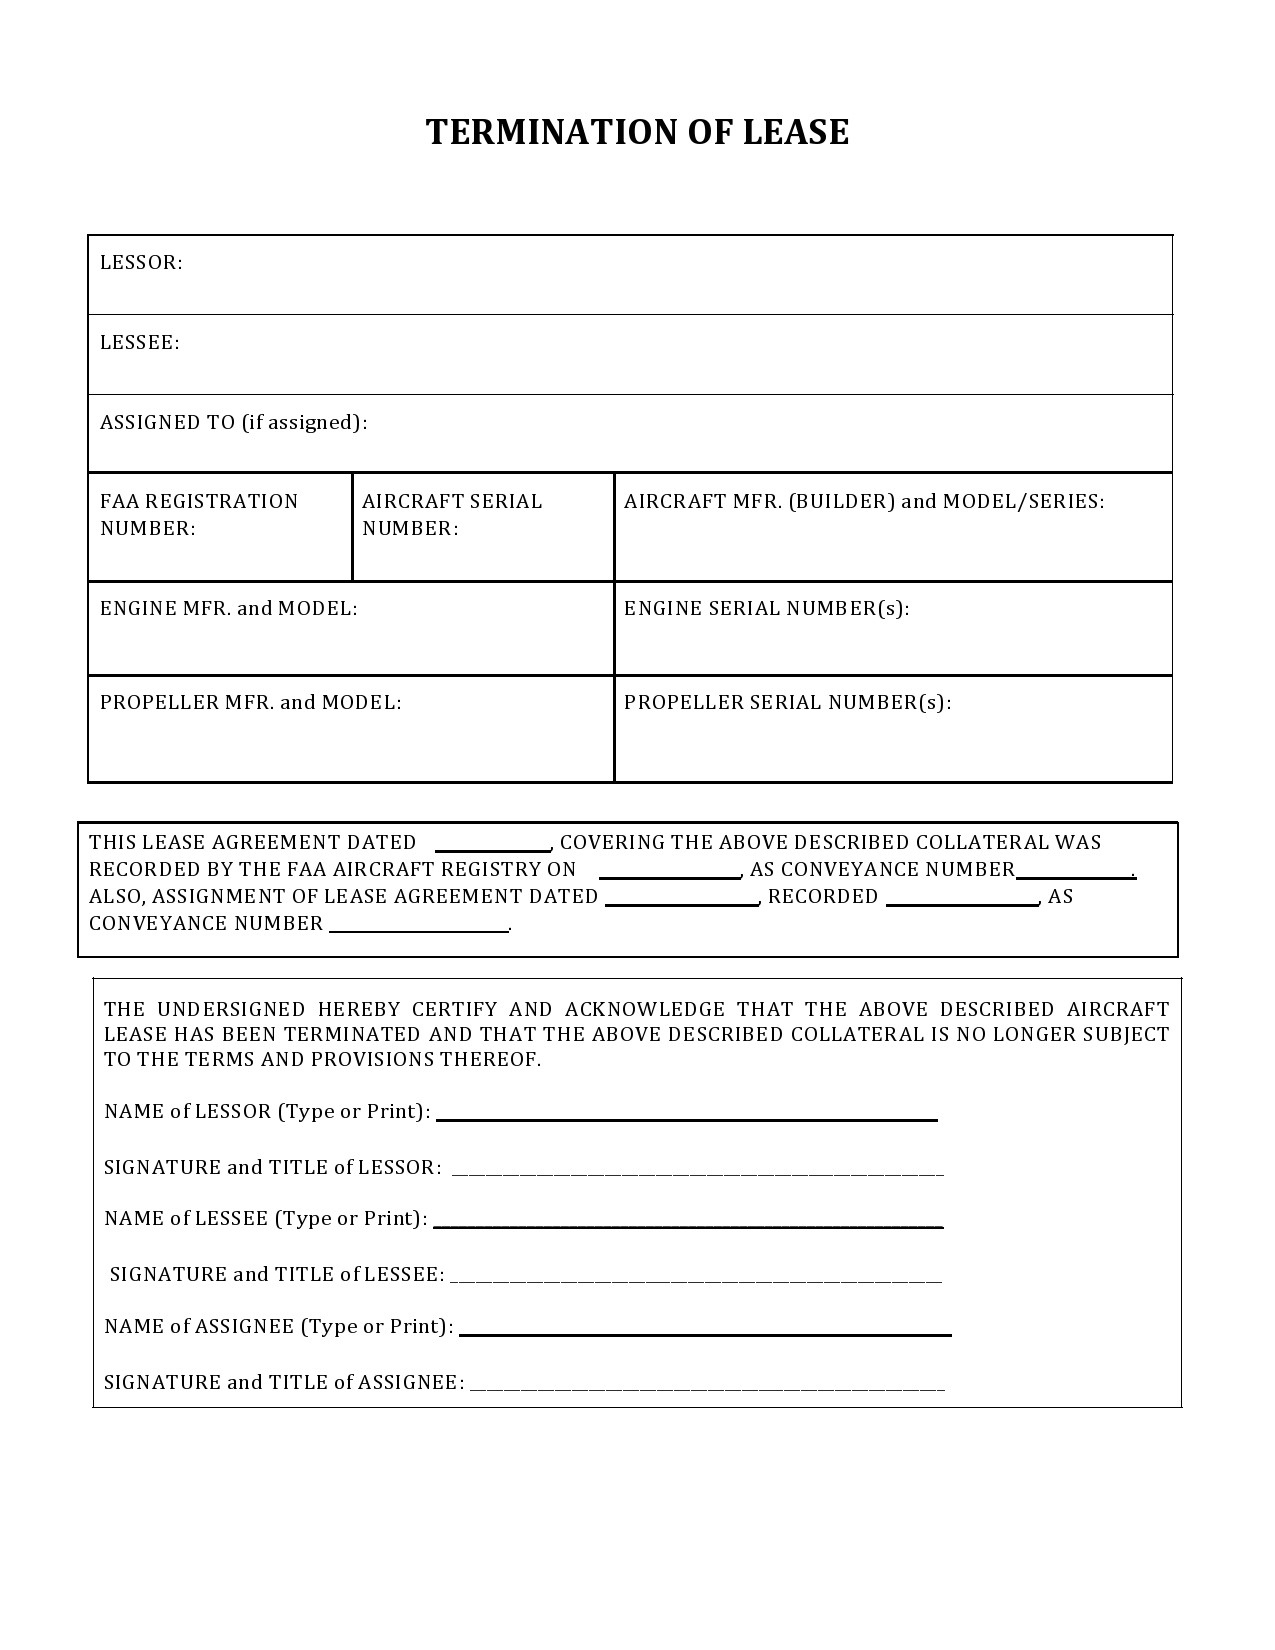 Fantastic Early Termination Of Lease Agreement Template